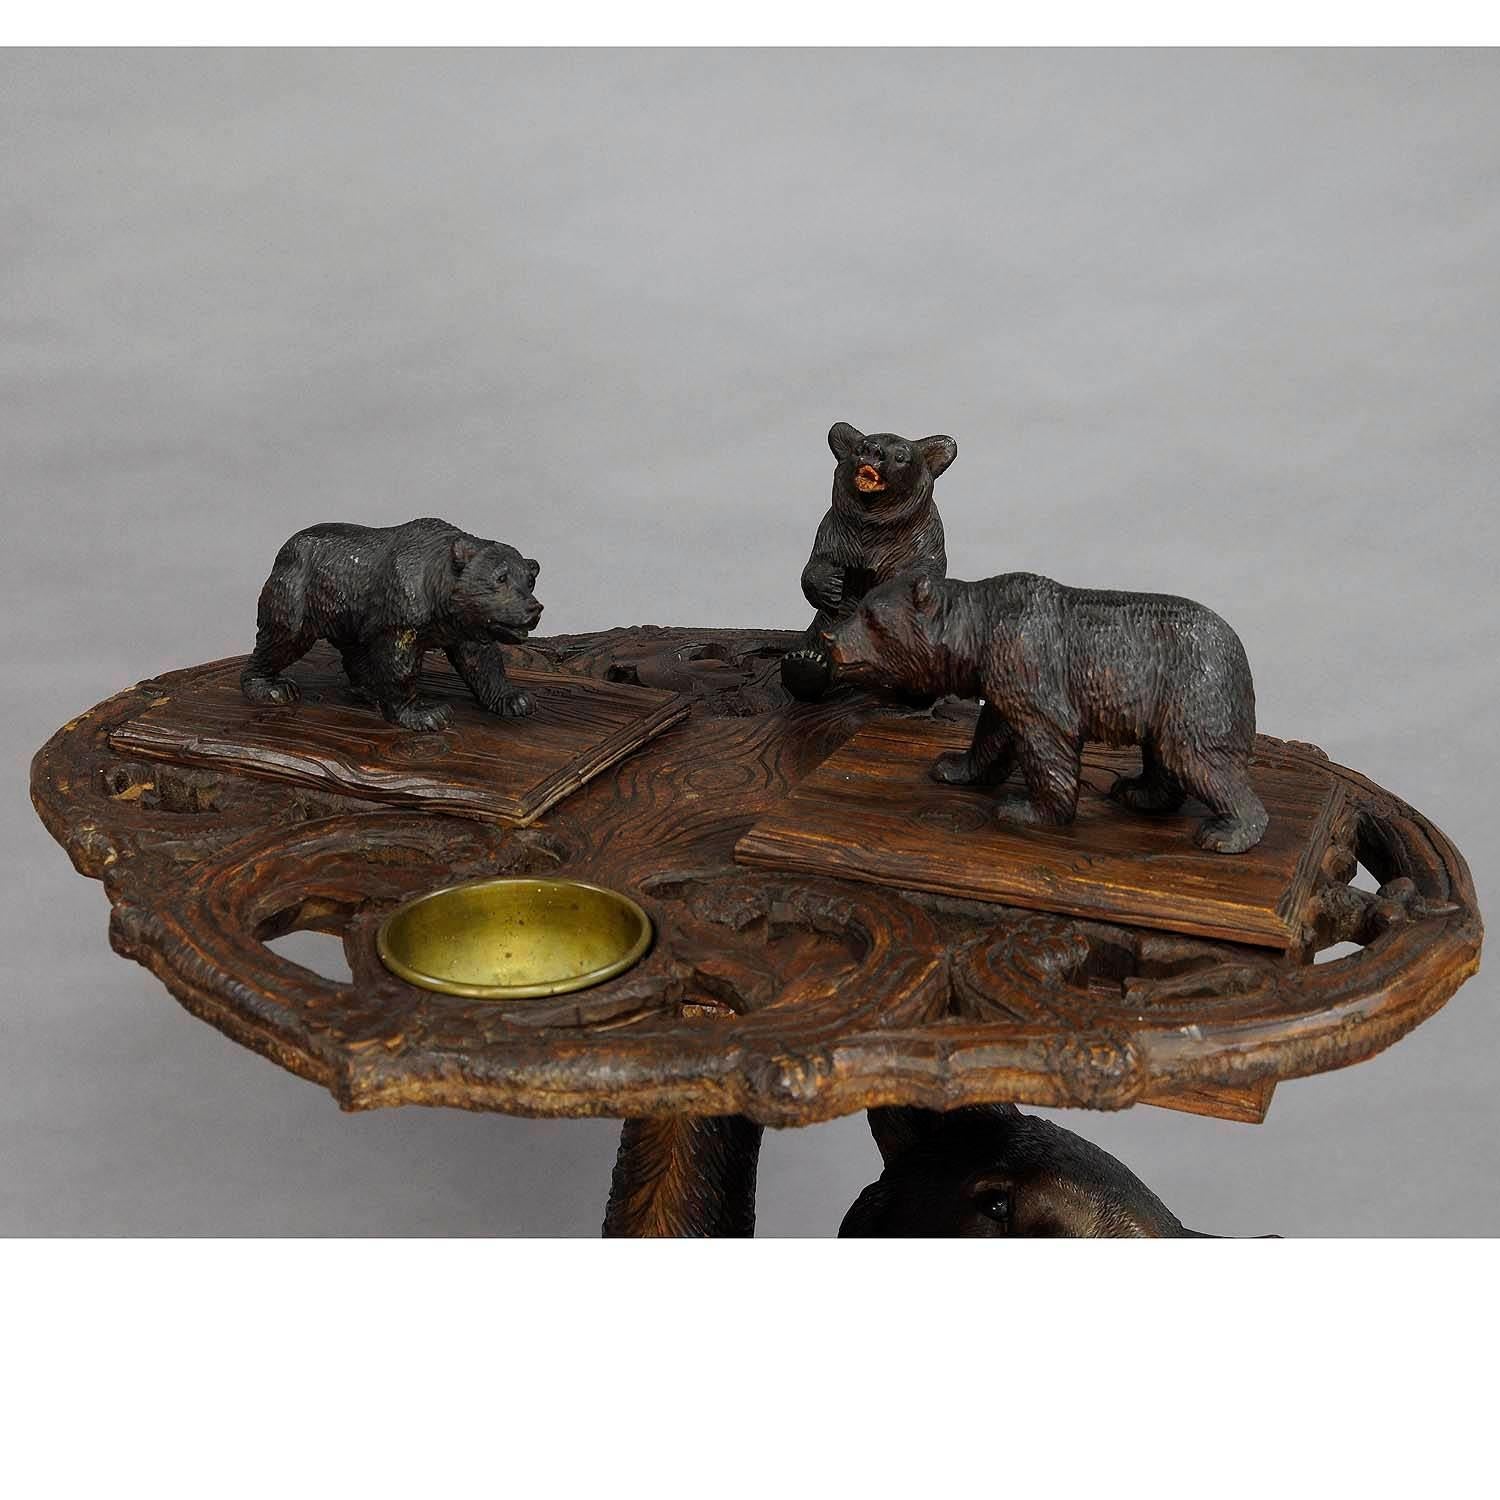 Fantastic Carved Black Forest Side Table with Bears (Schweizerisch)